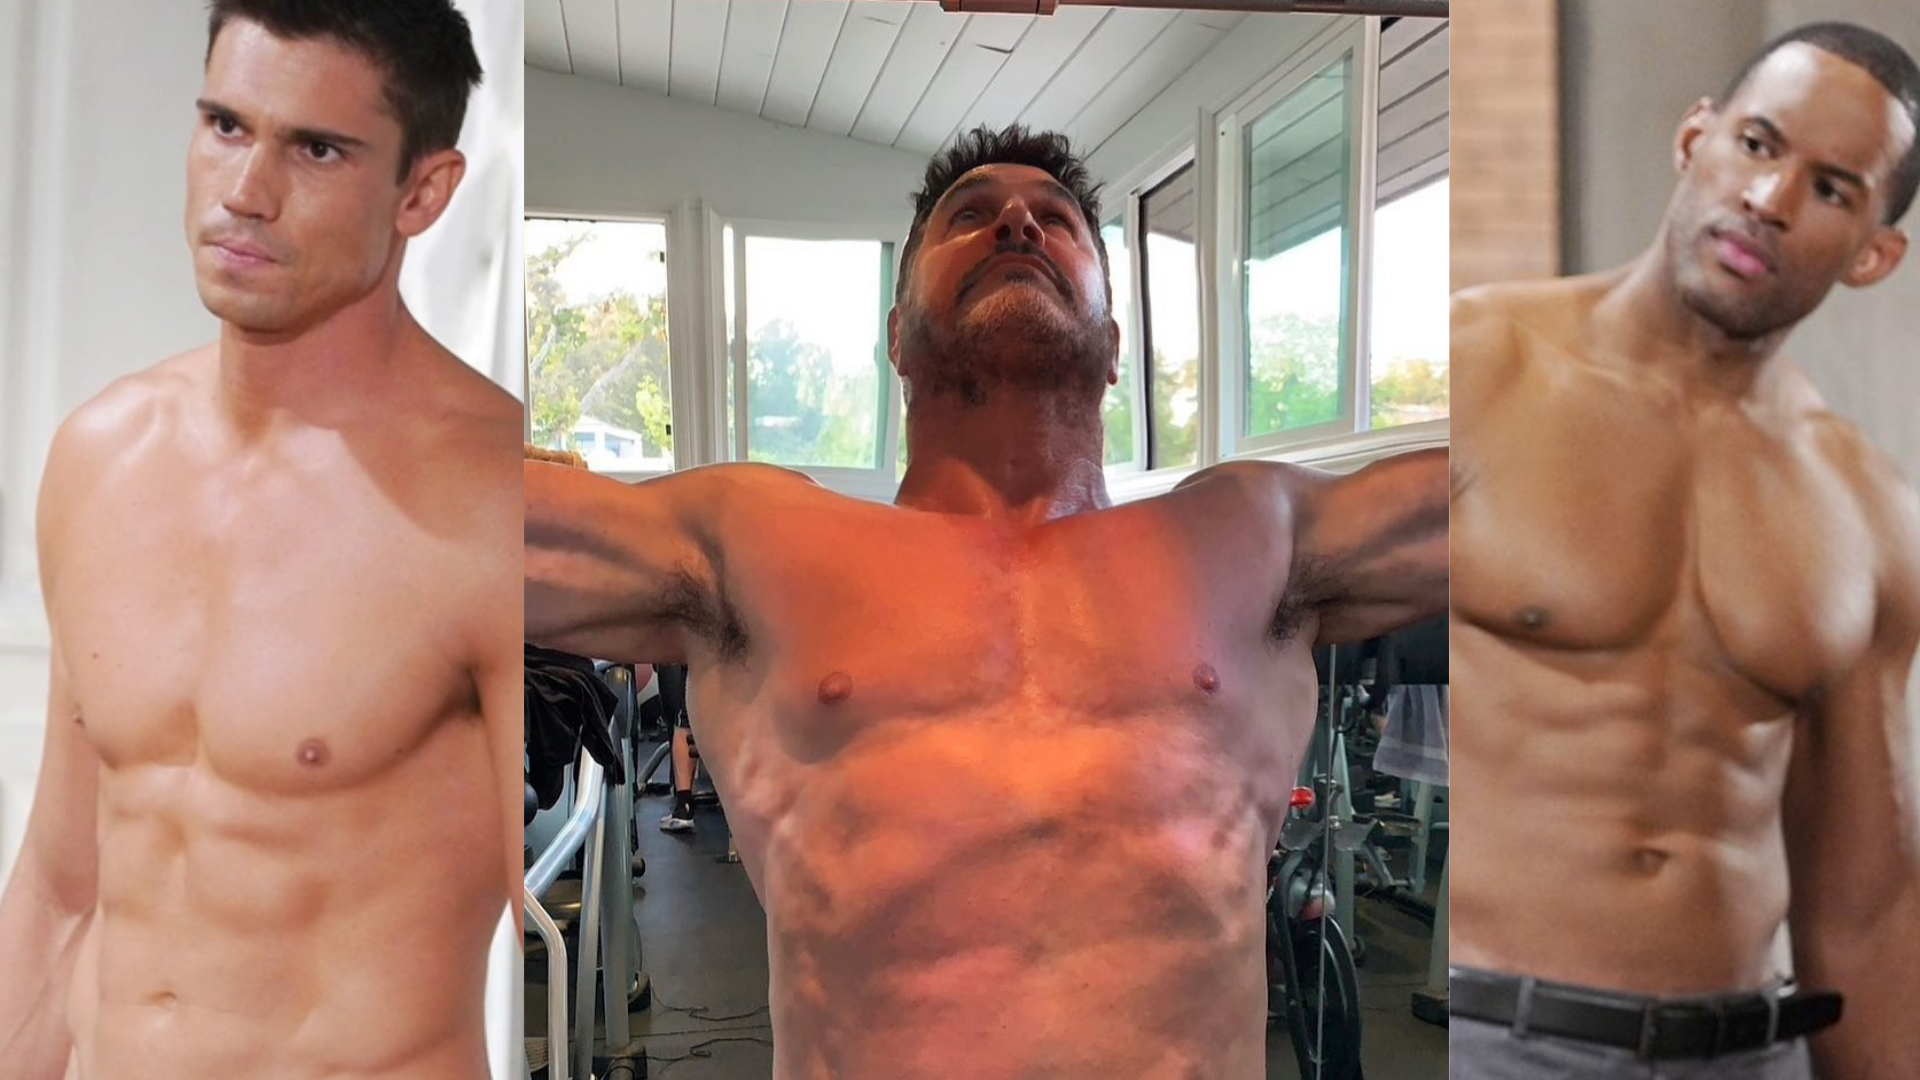  Fitness tips from your favorite Bold and the Beautiful hunks – Tanner Novlan, Don Diamont, Lawrence Saint Victor and Scott Clifton